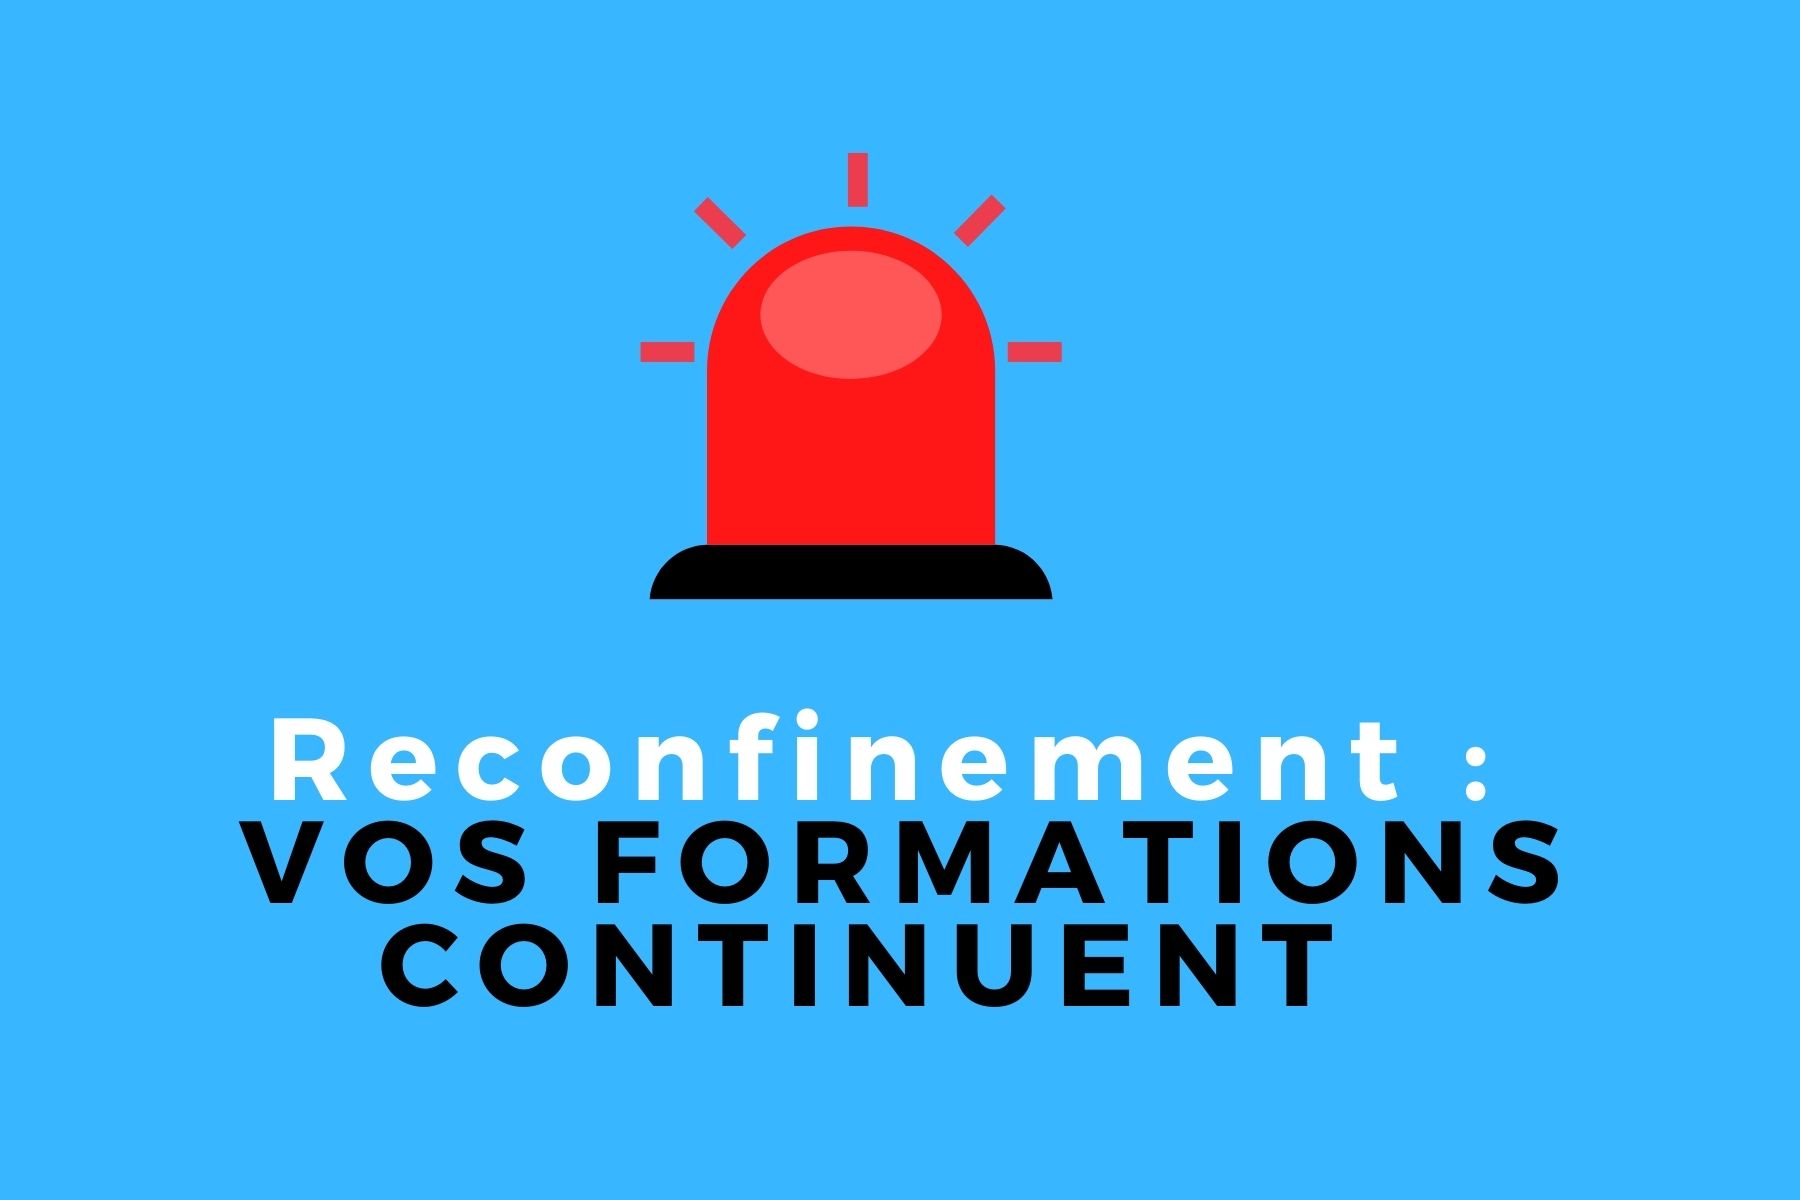 Reconfinement : les formations continuent - ABC FORMATION CONTINUE